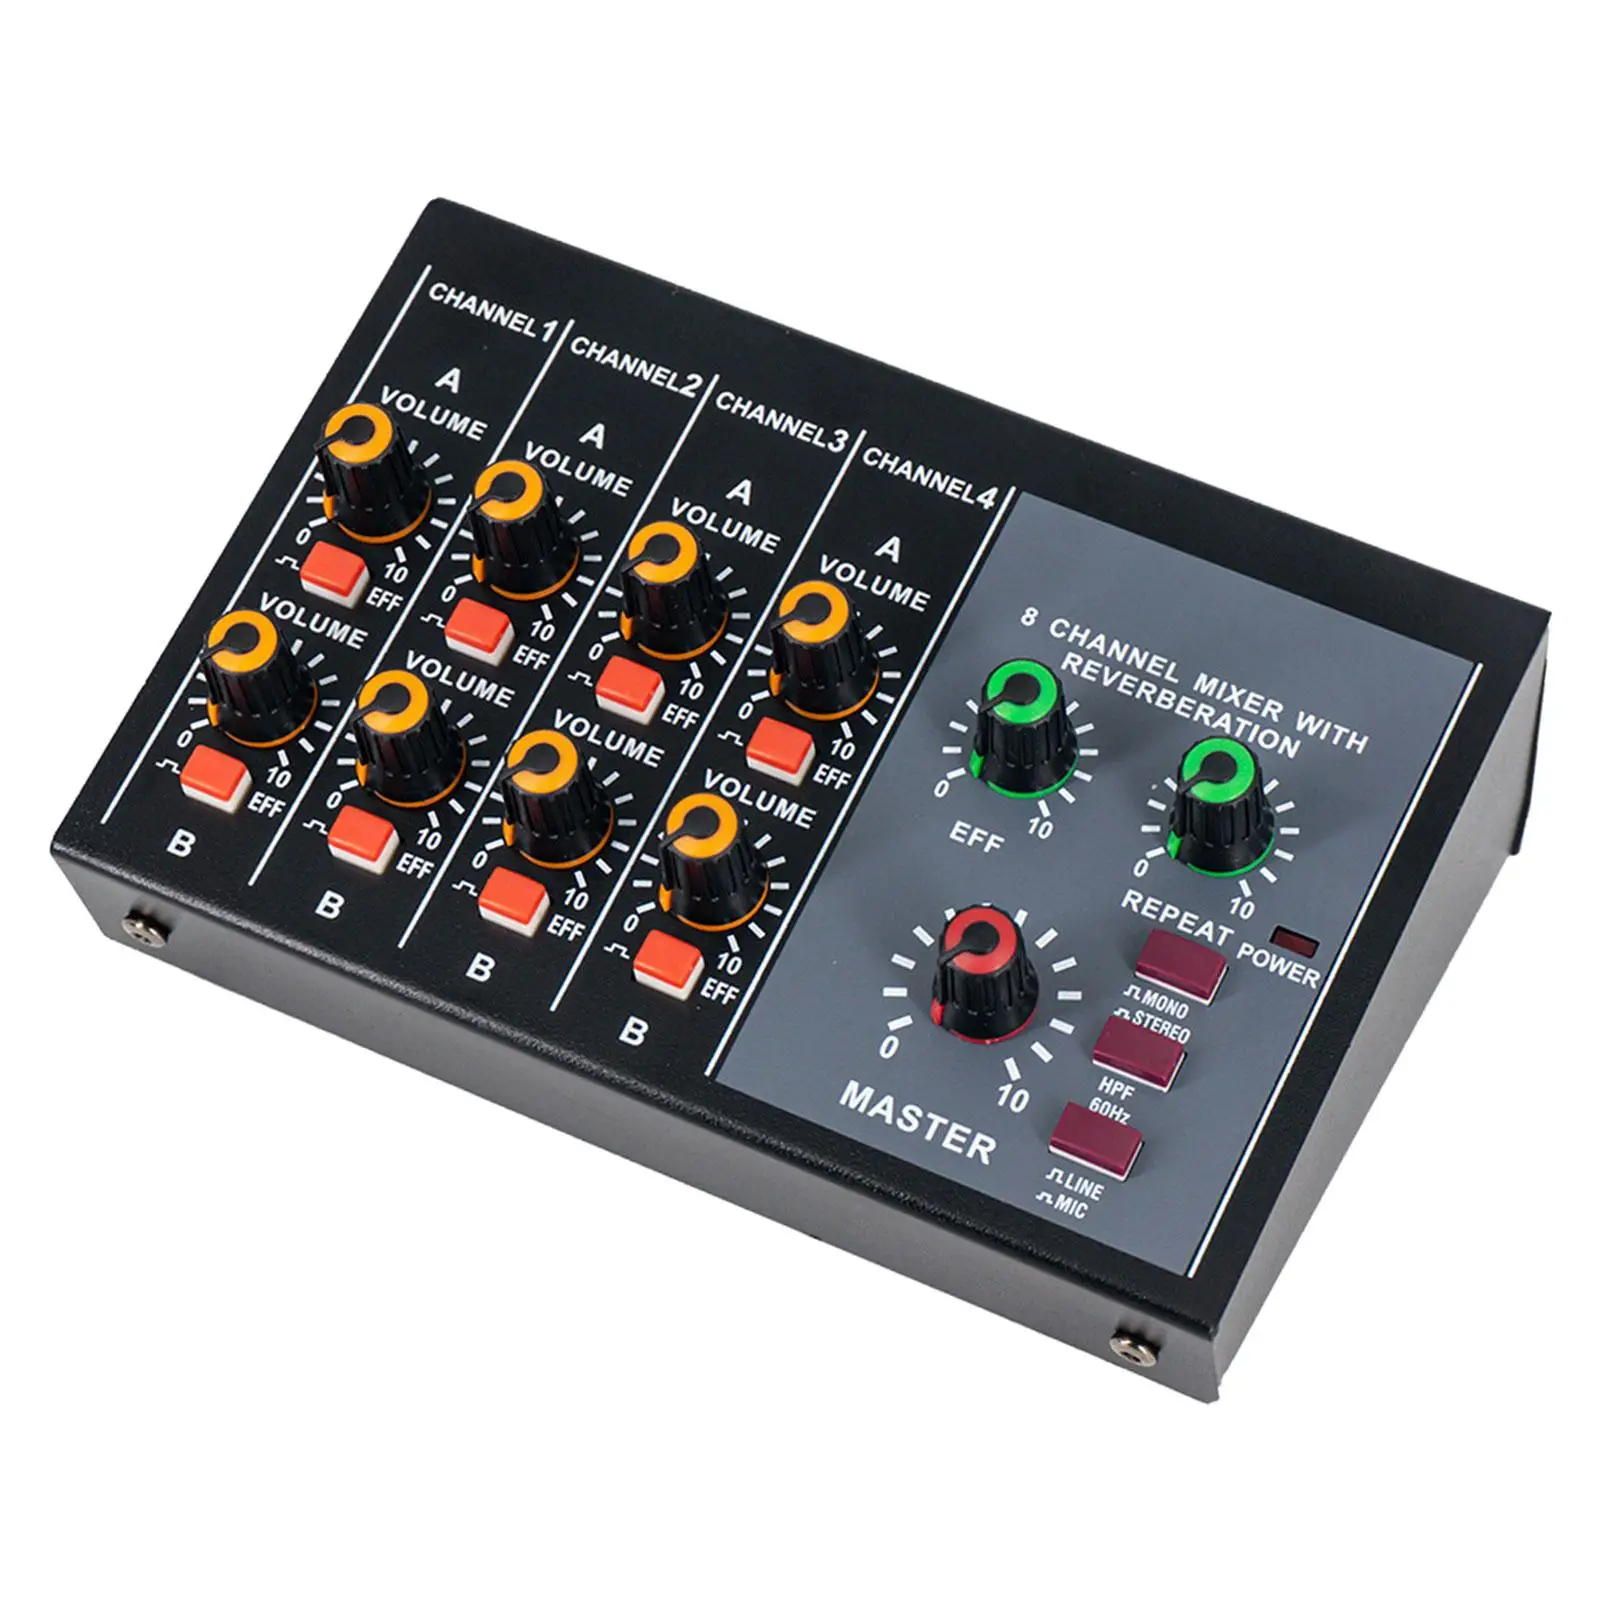 

8 Channel Mixer Compact Stereo Equalizer Audio Mixer for Microphones Karaoke DJ Stage Band Performance Music Application